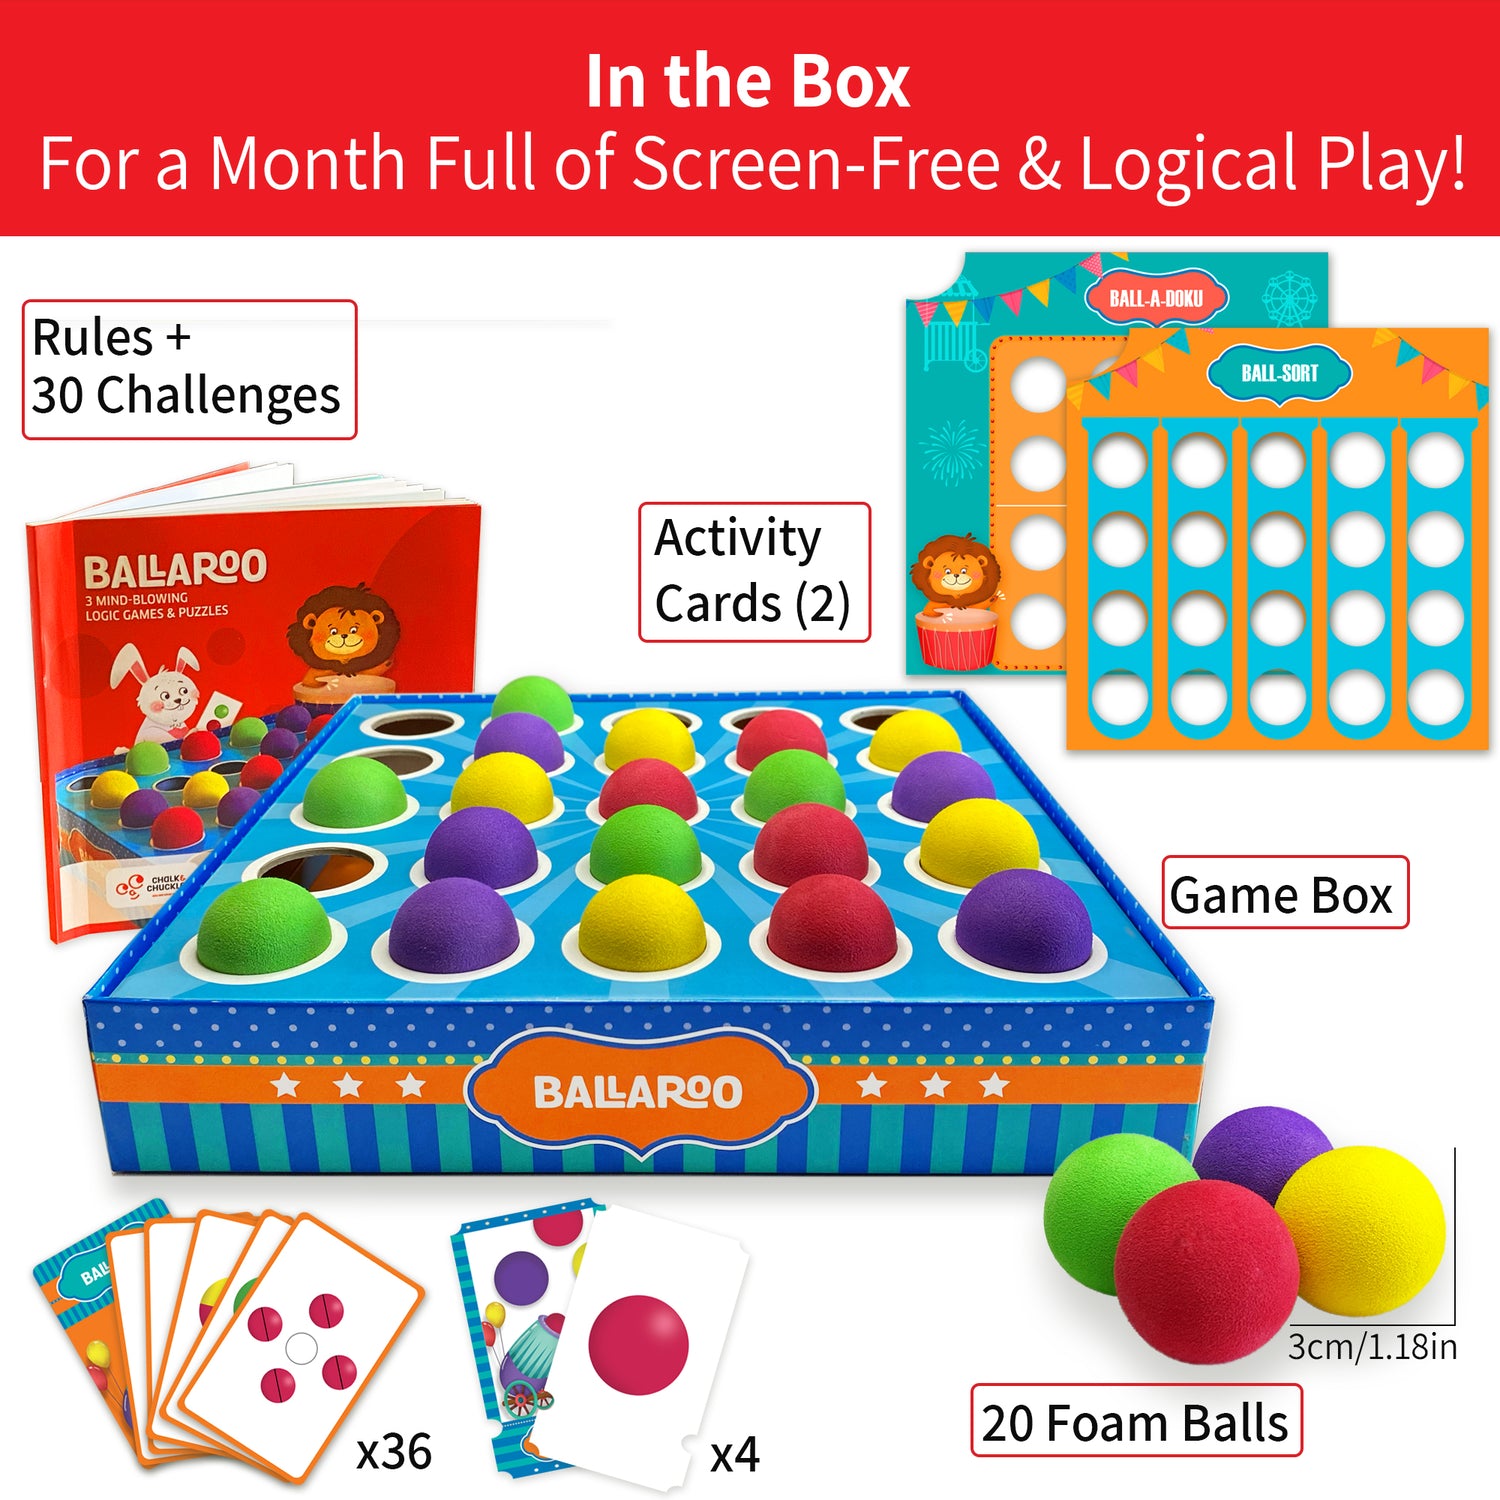 Chalk and Chuckles Ballaroo Brain Game Box Contains for Screen-free and Logical Play